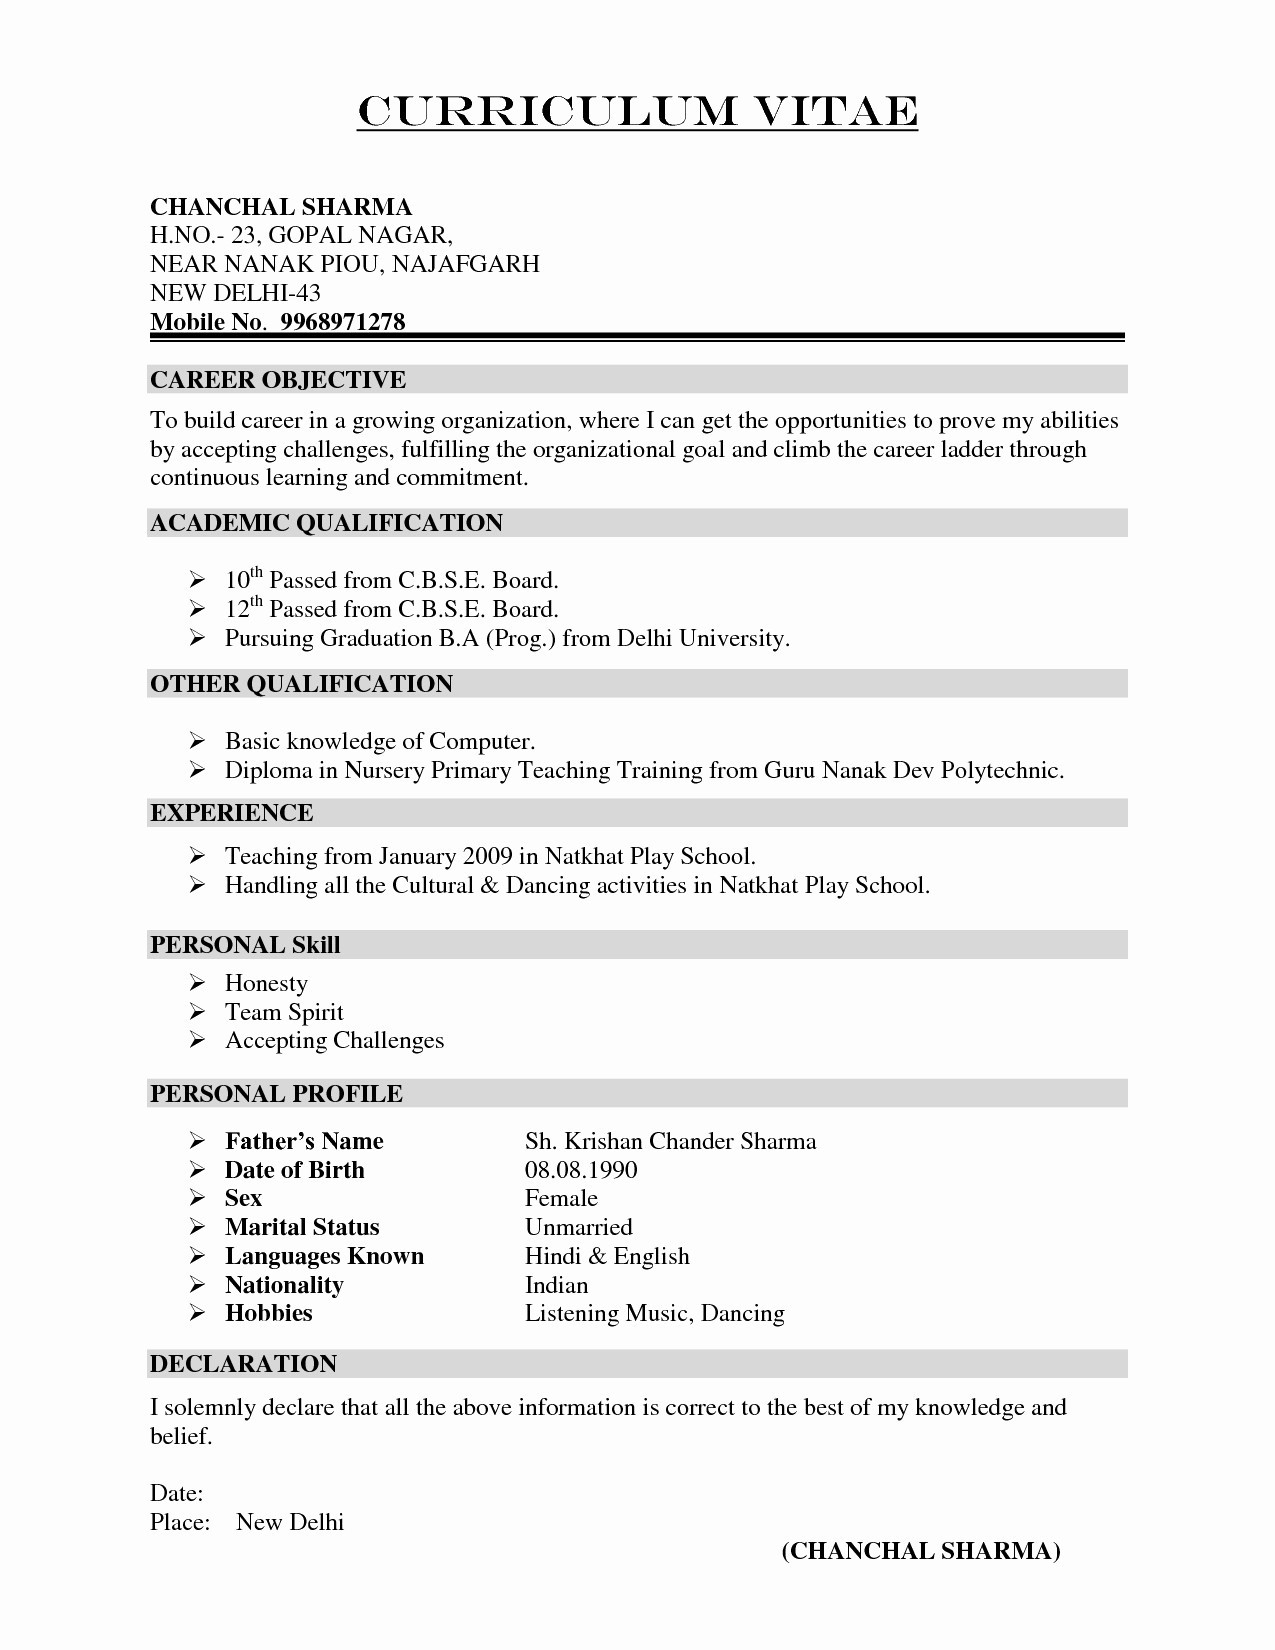 Interview Cover Letter Template - Resumes and Cover Letters Elegant New Resume Cover Letter formatted